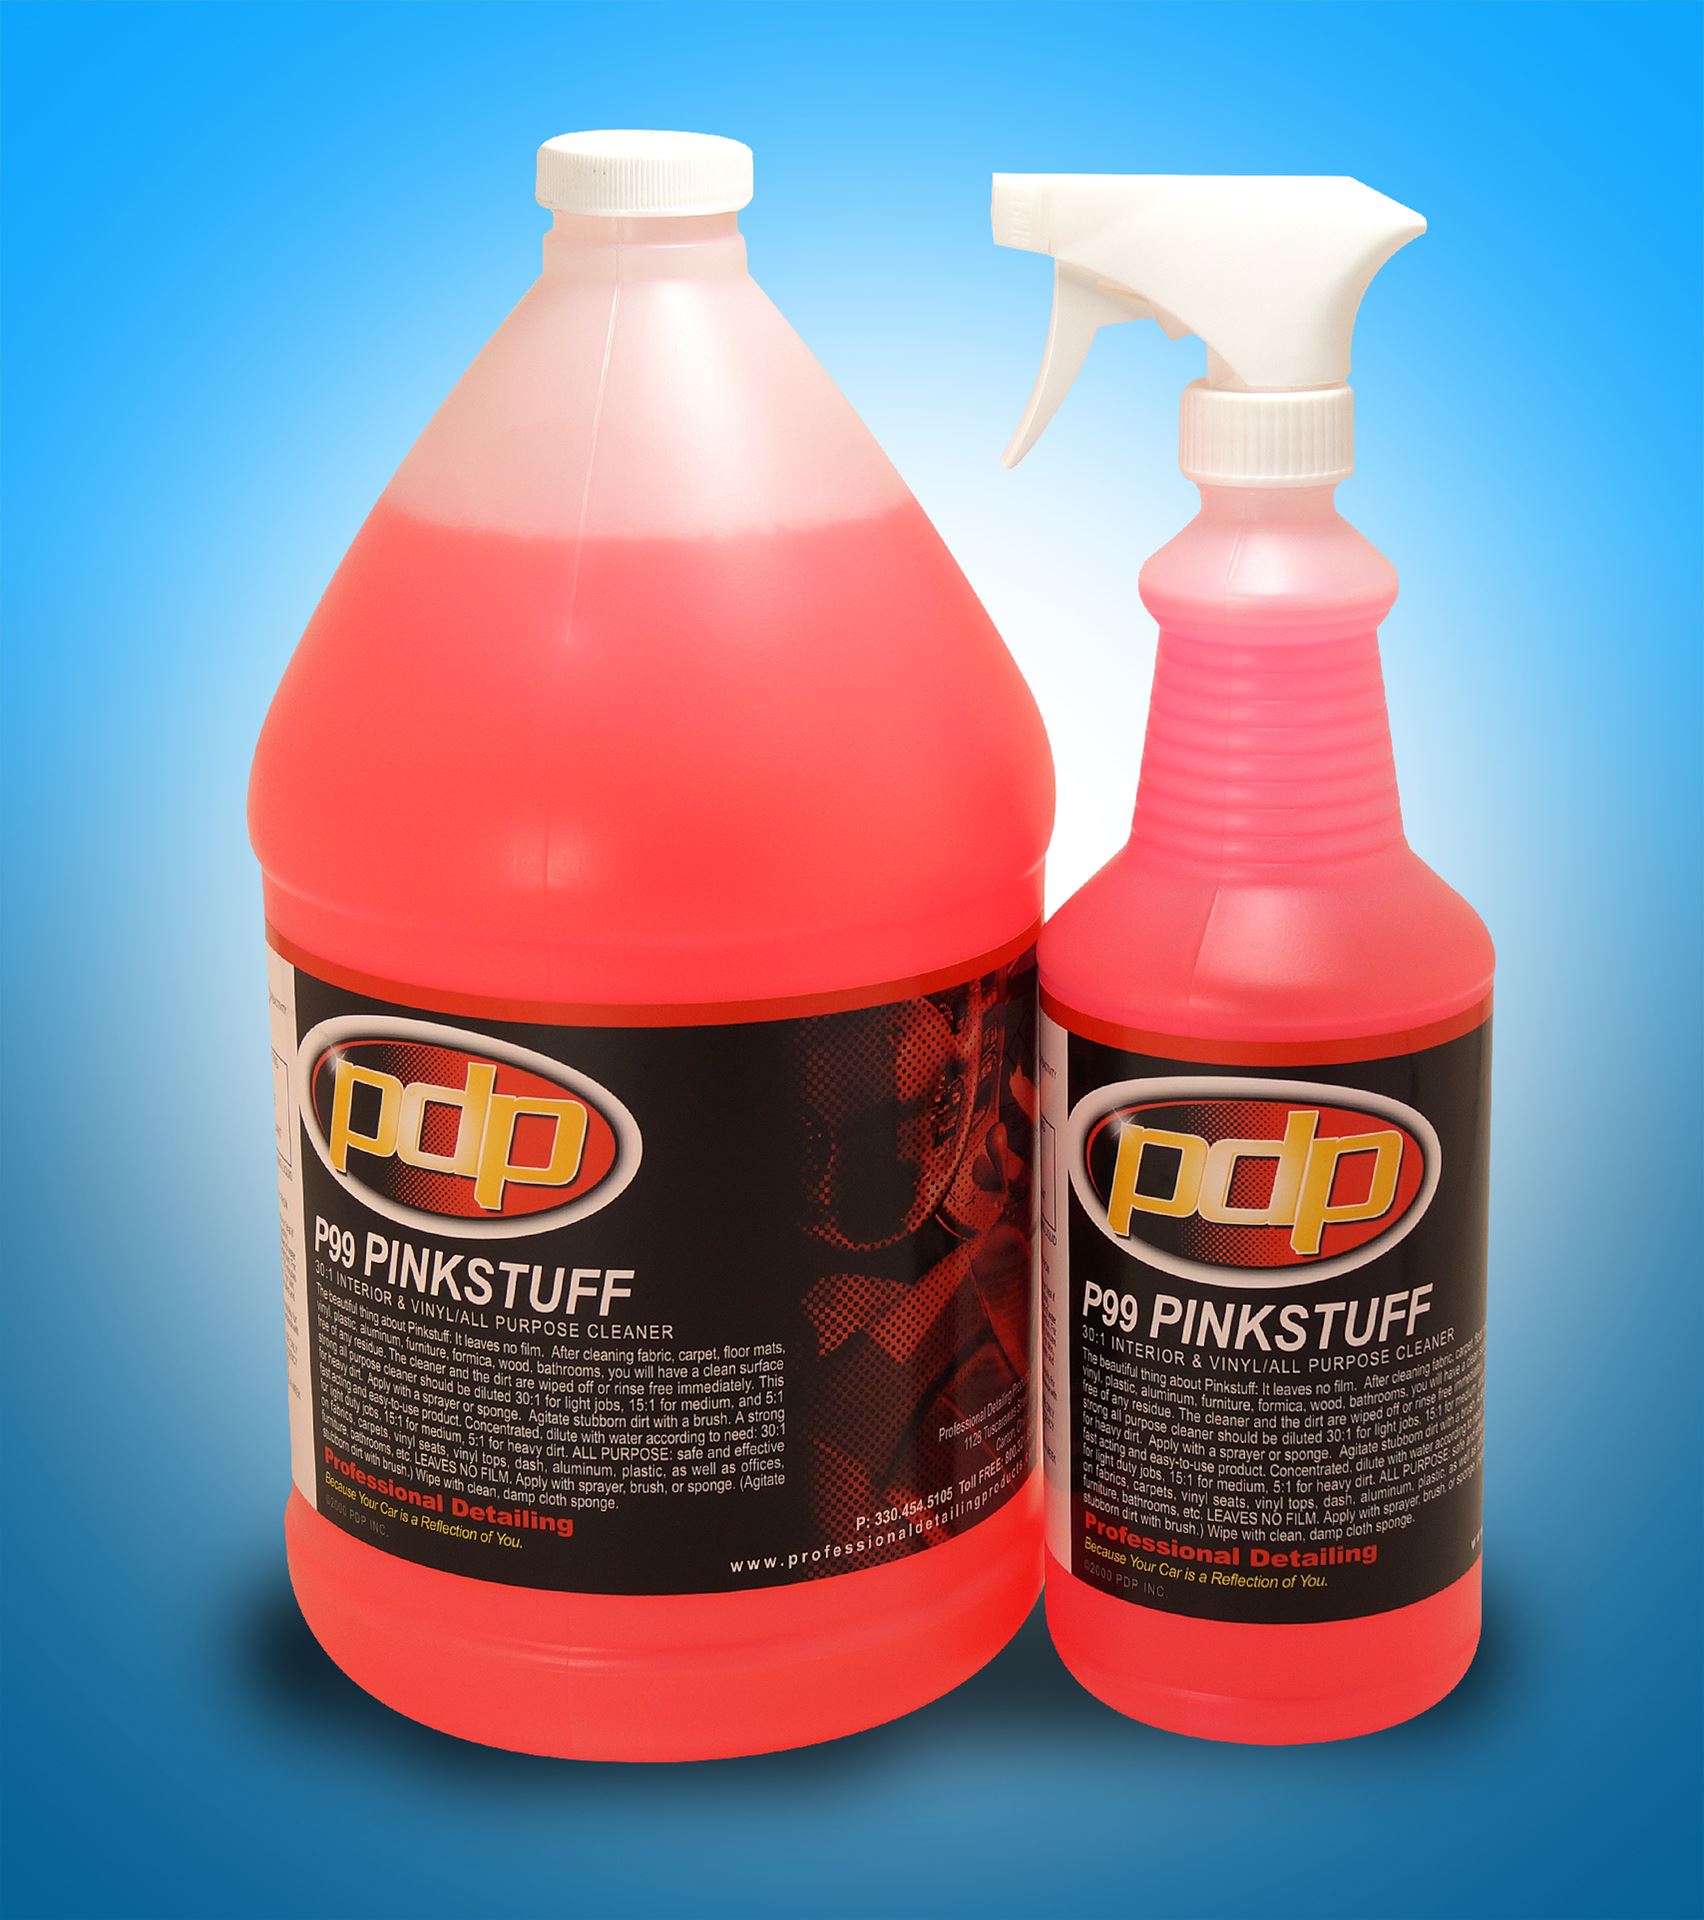 PINKSTUFF . Professional Detailing Products, Because Your Car is a